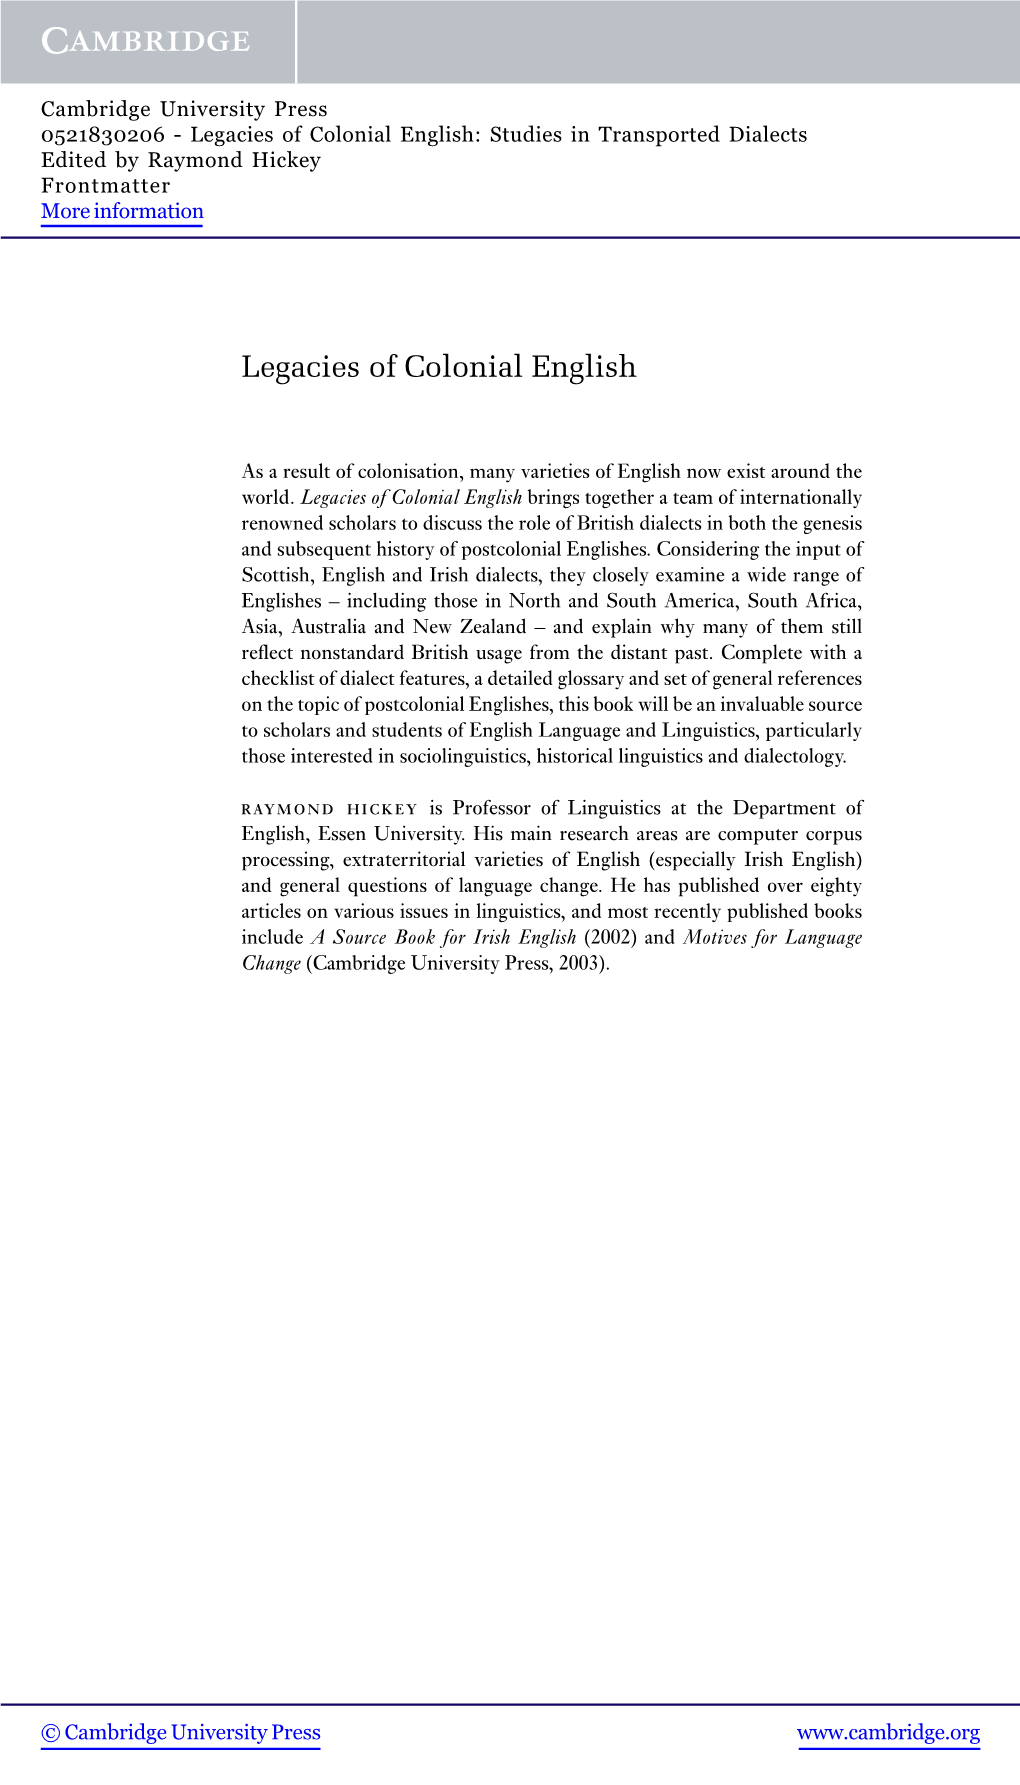 Legacies of Colonial English: Studies in Transported Dialects Edited by Raymond Hickey Frontmatter More Information